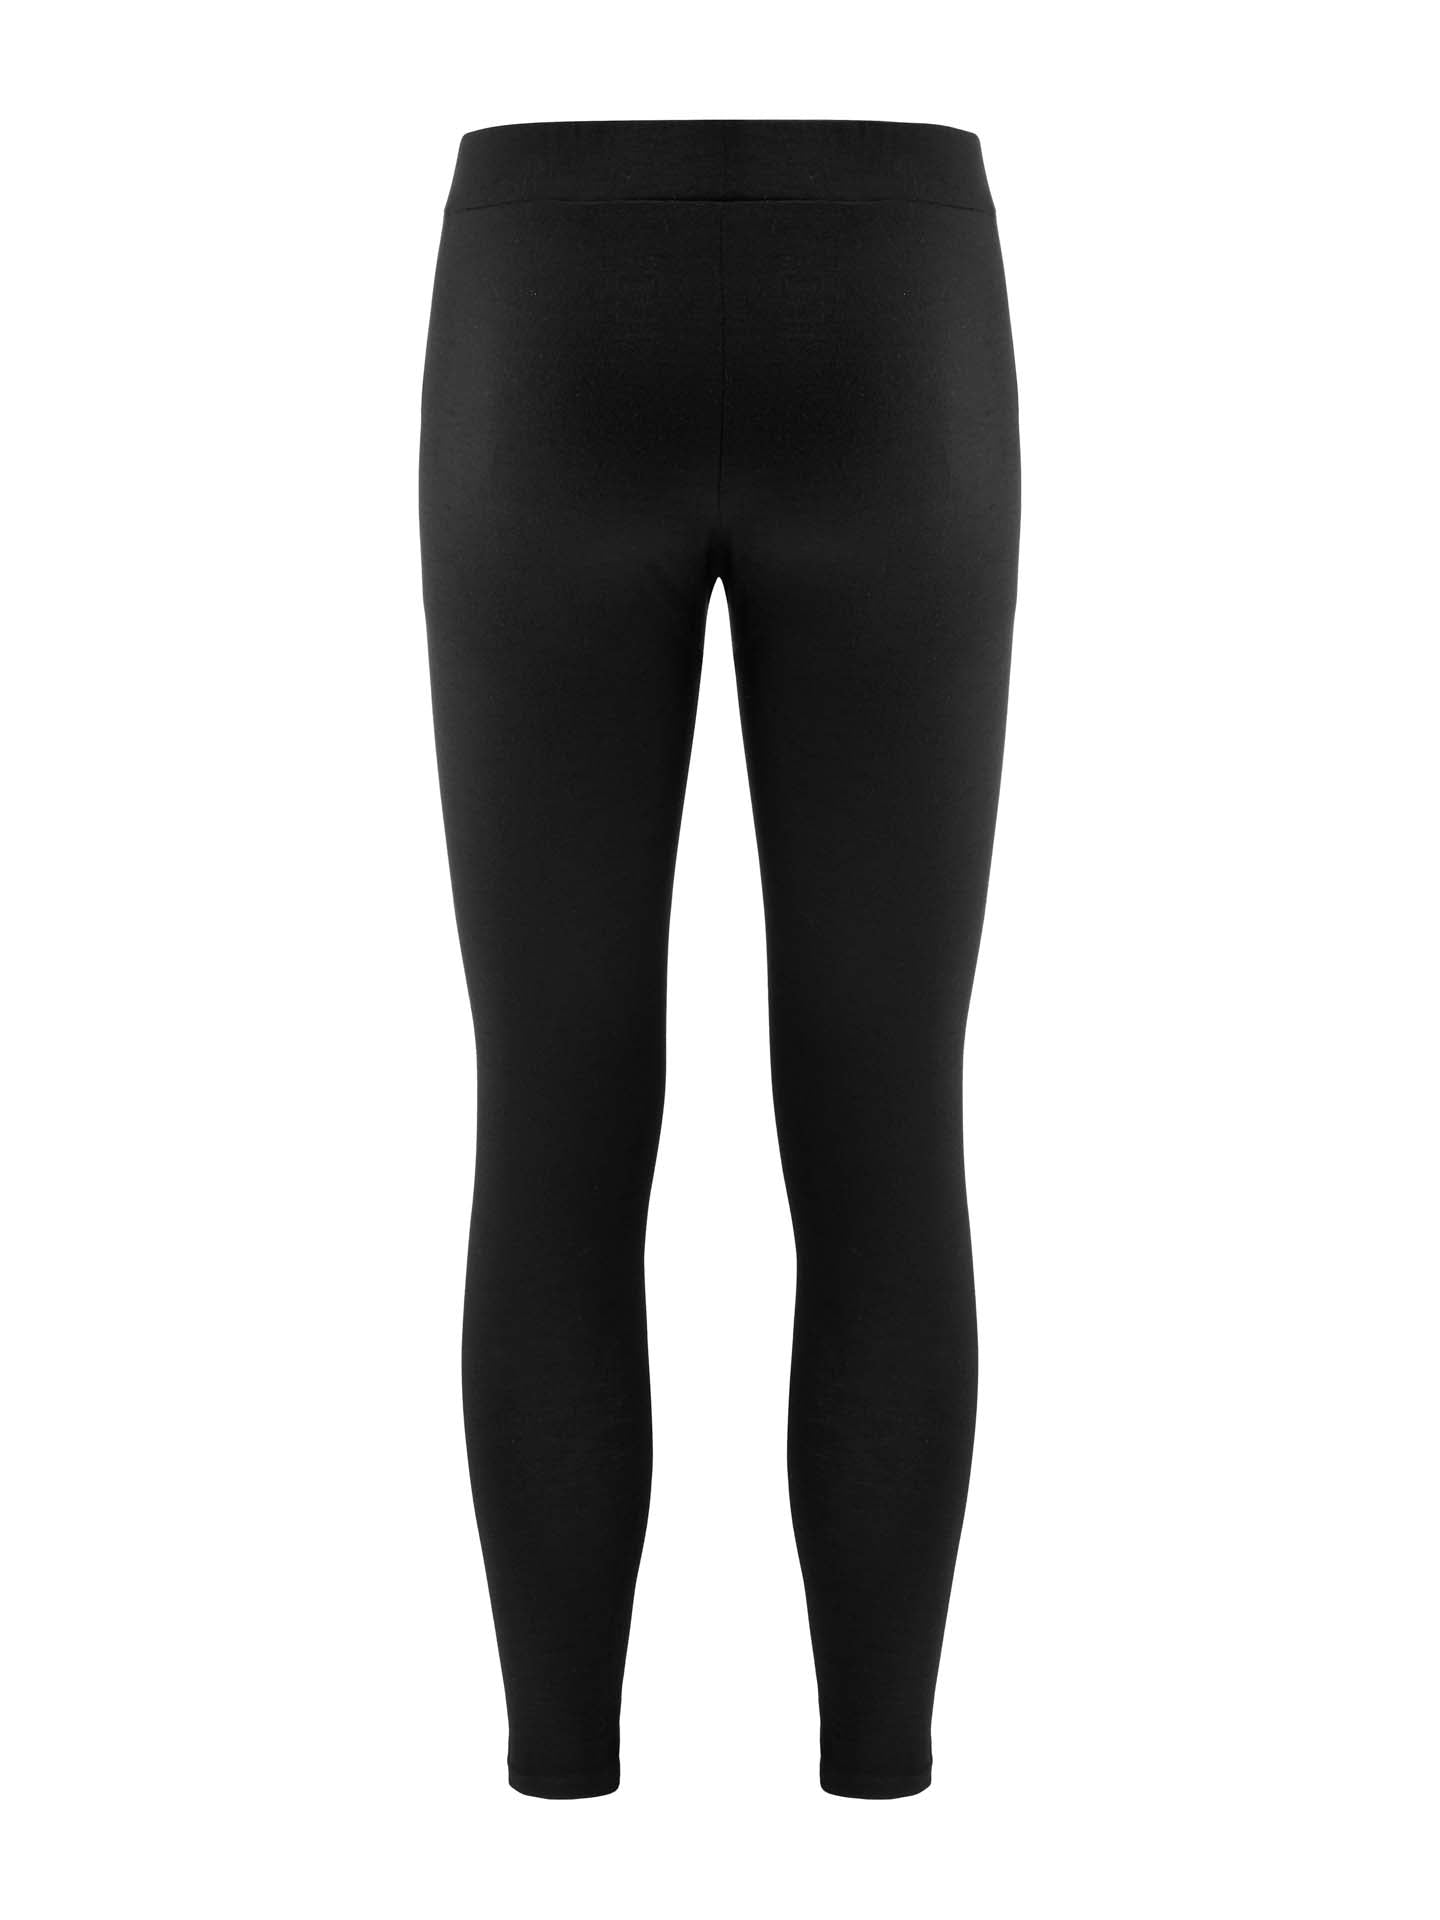 Wool Thermal Long Johns: Keep Your Hands Warm With Elastic Mock Neck First Under  2 Panties And Layer From Jichio, $32.25